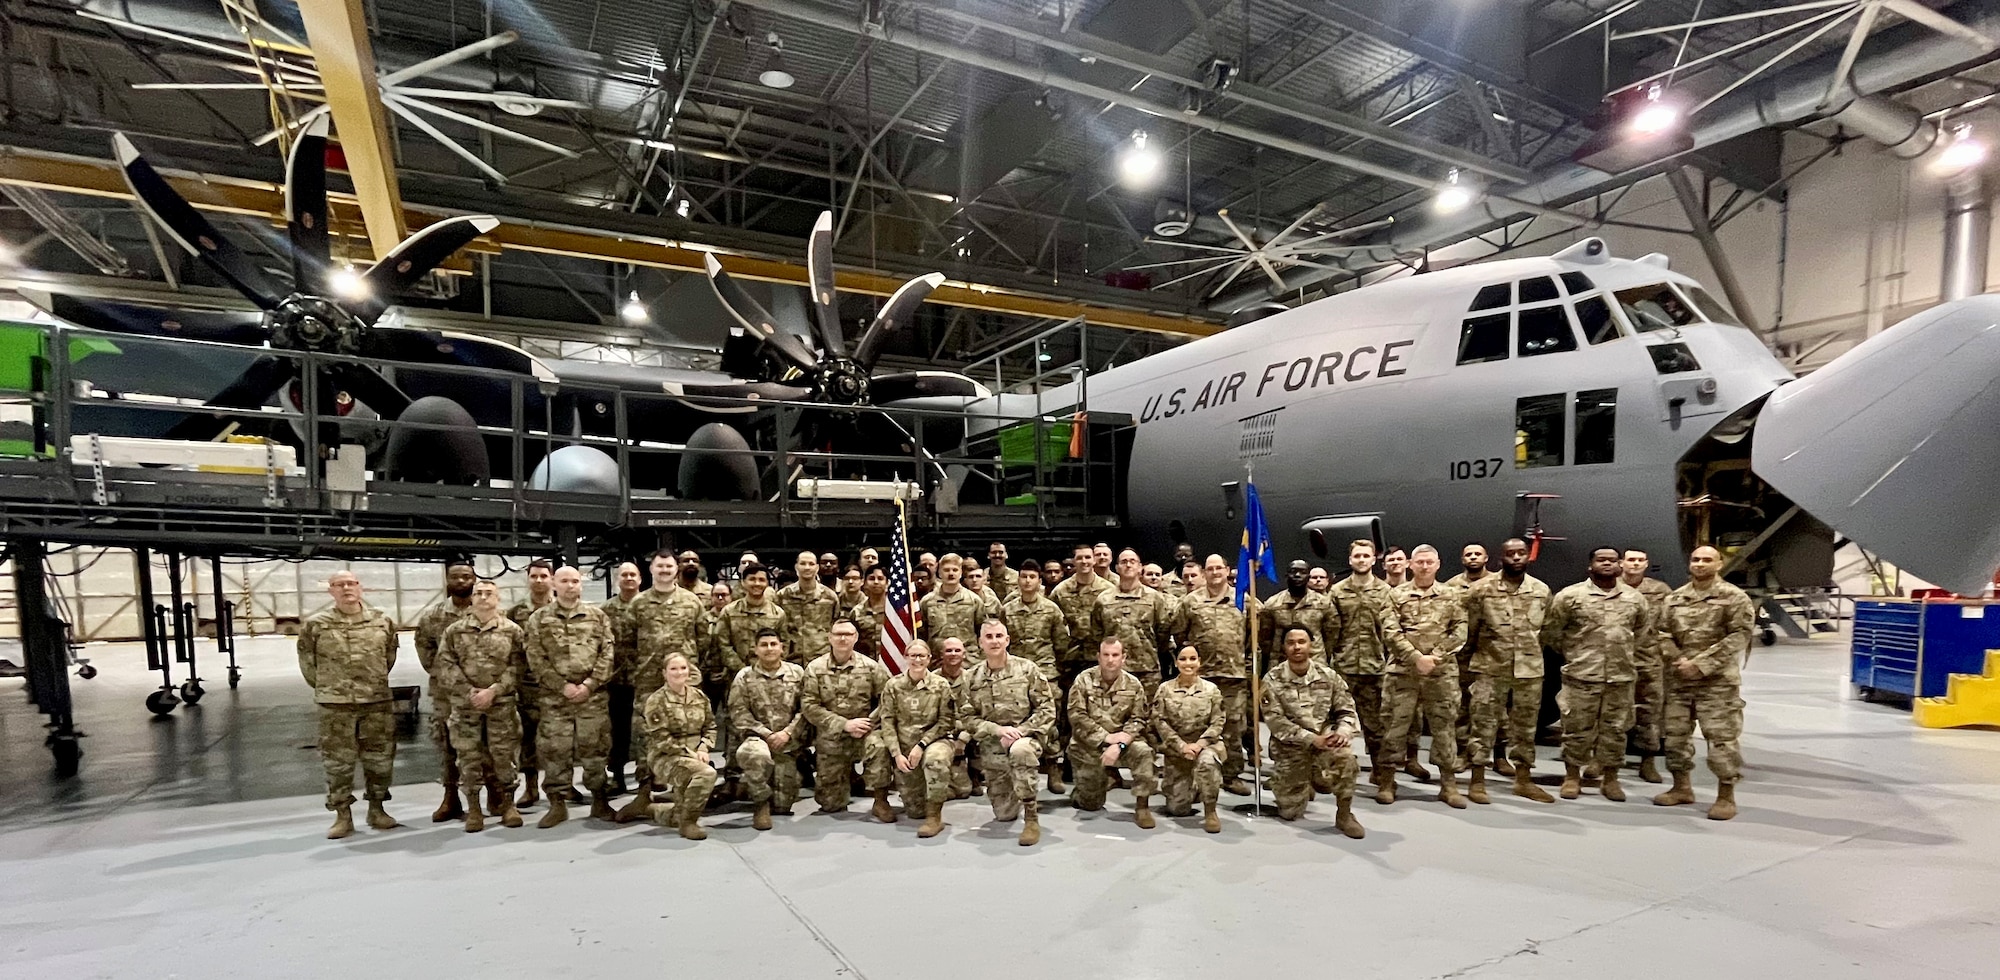 a group of people in military uniforms stands in front of an airplane inside of a hangar